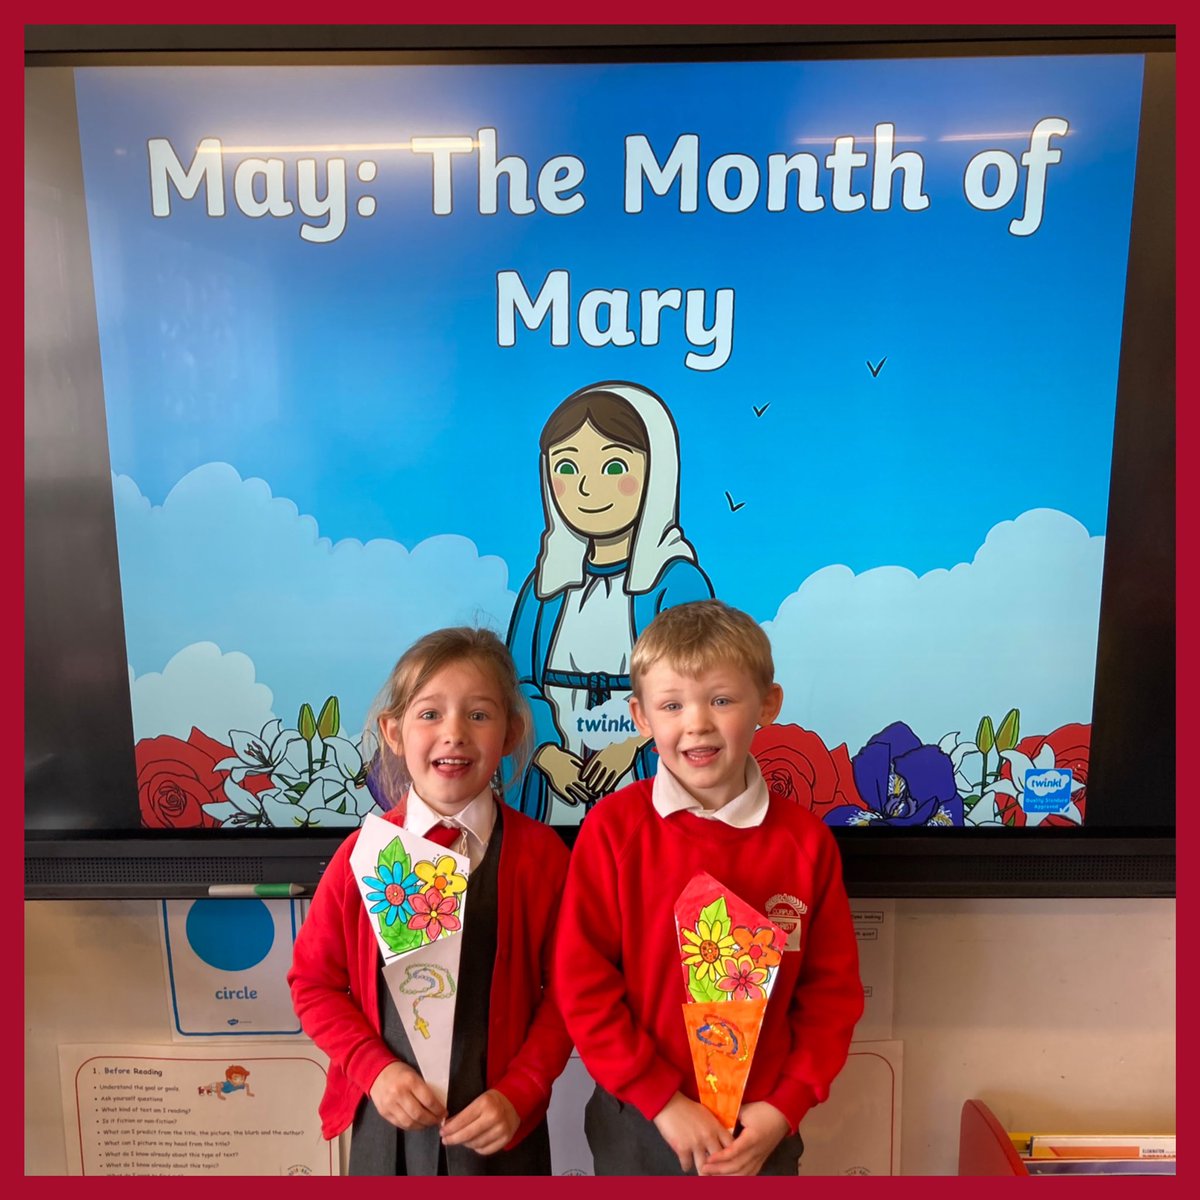 During the month of May, P1b have been remembering Our Lady. This week we decorated our altar with flowers as a sign of our love and affection for Mary. ☺️📿💐 @CorpusChristi_K @ArchdiocGlasgow